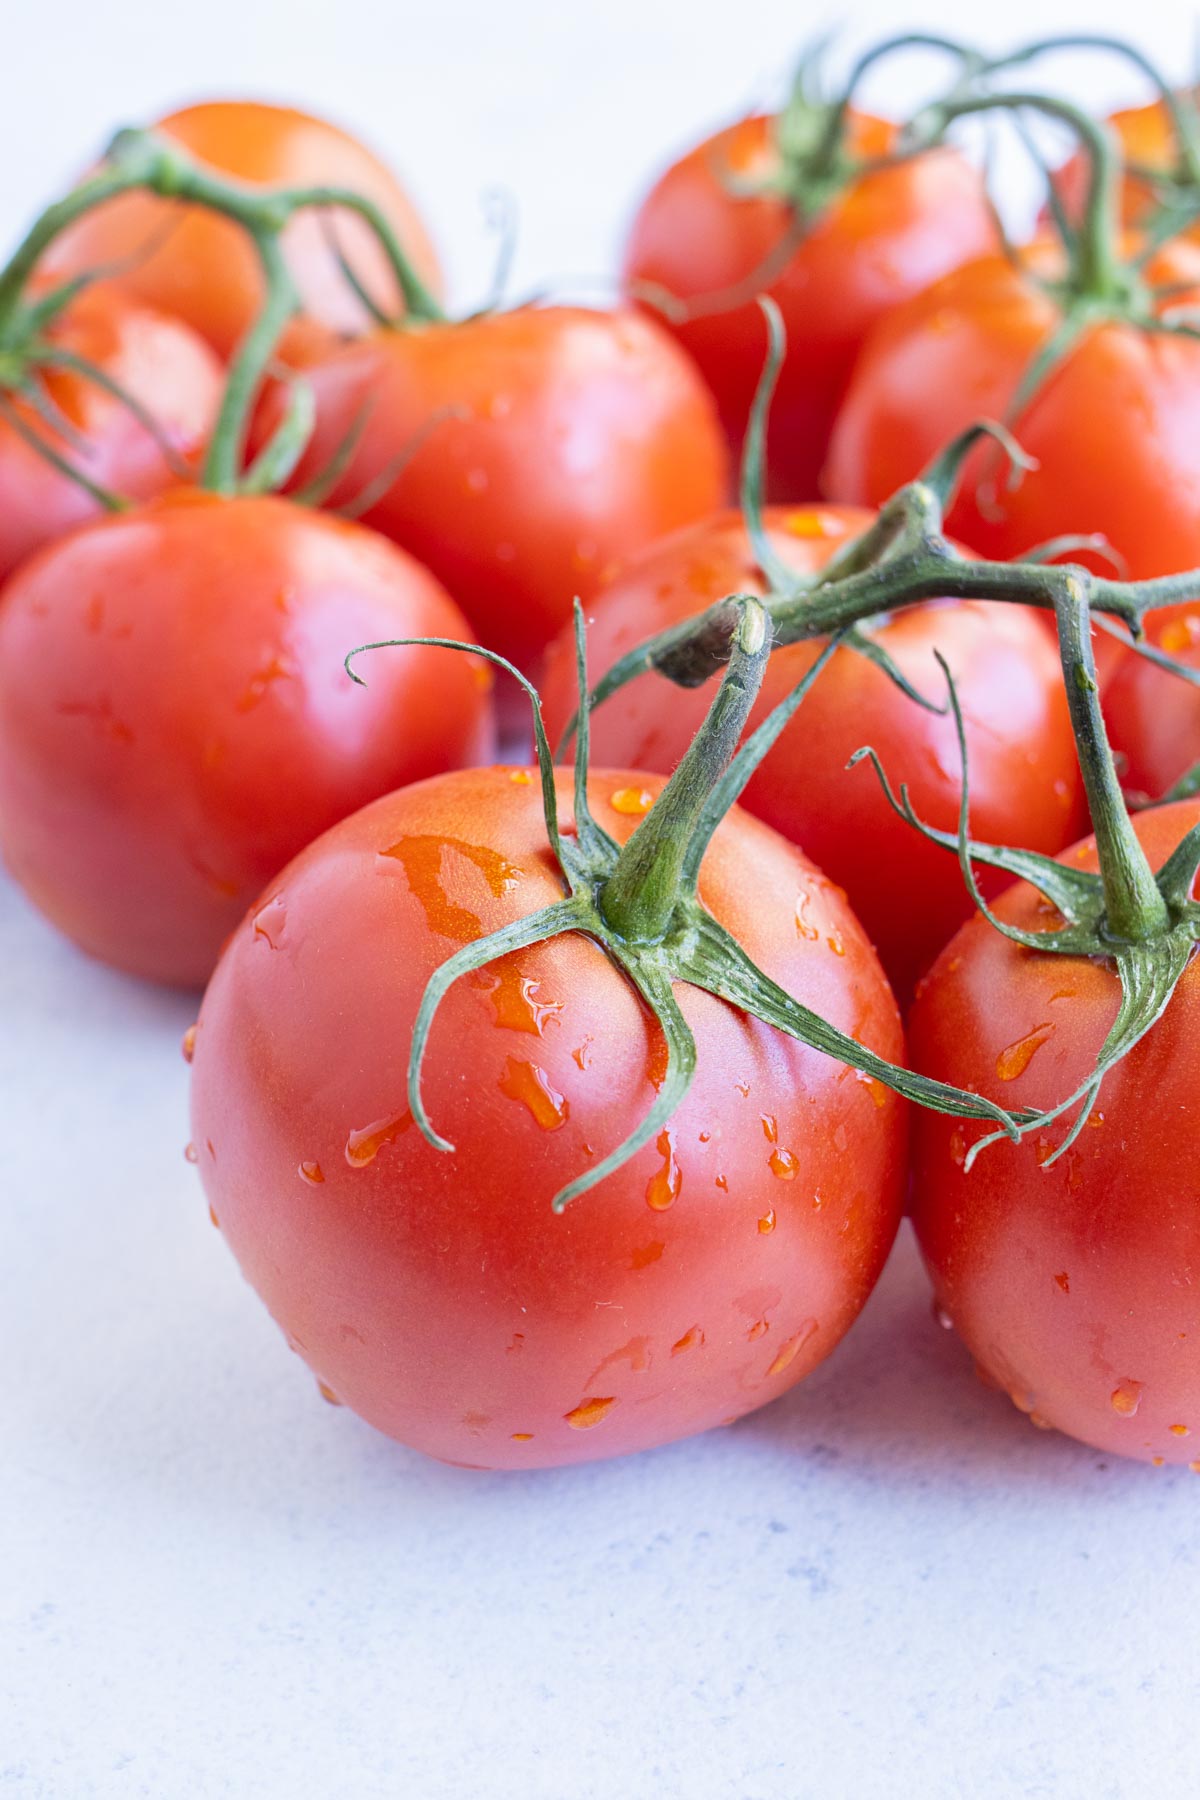 Ripe and fresh tomatoes in a bunch.